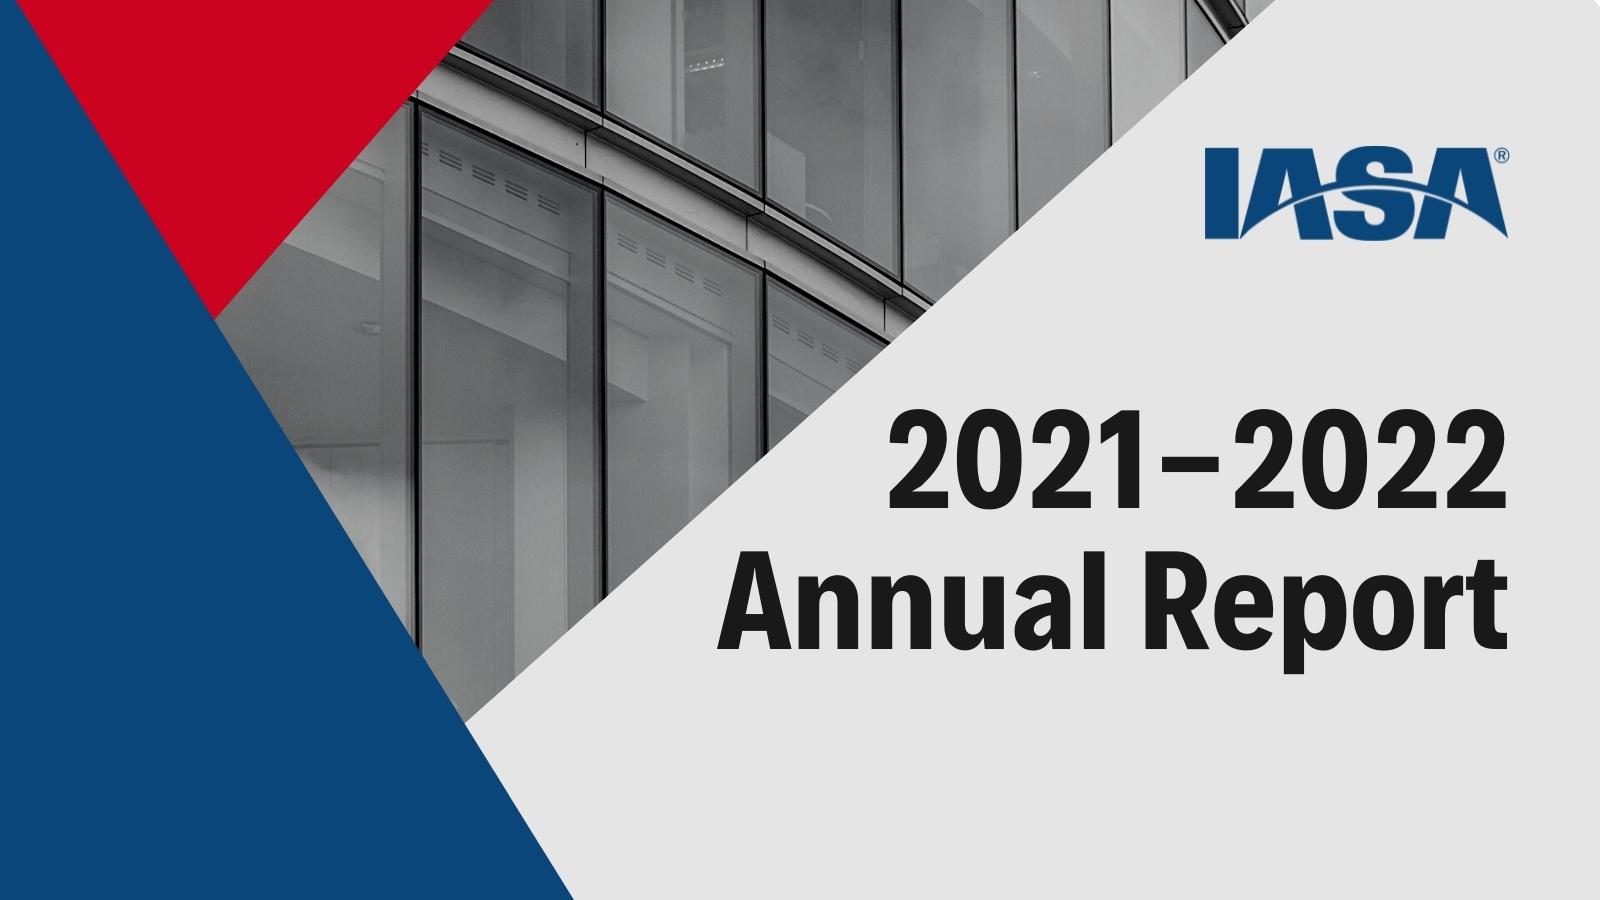 IASA Releases its 2021-2022 Annual Report